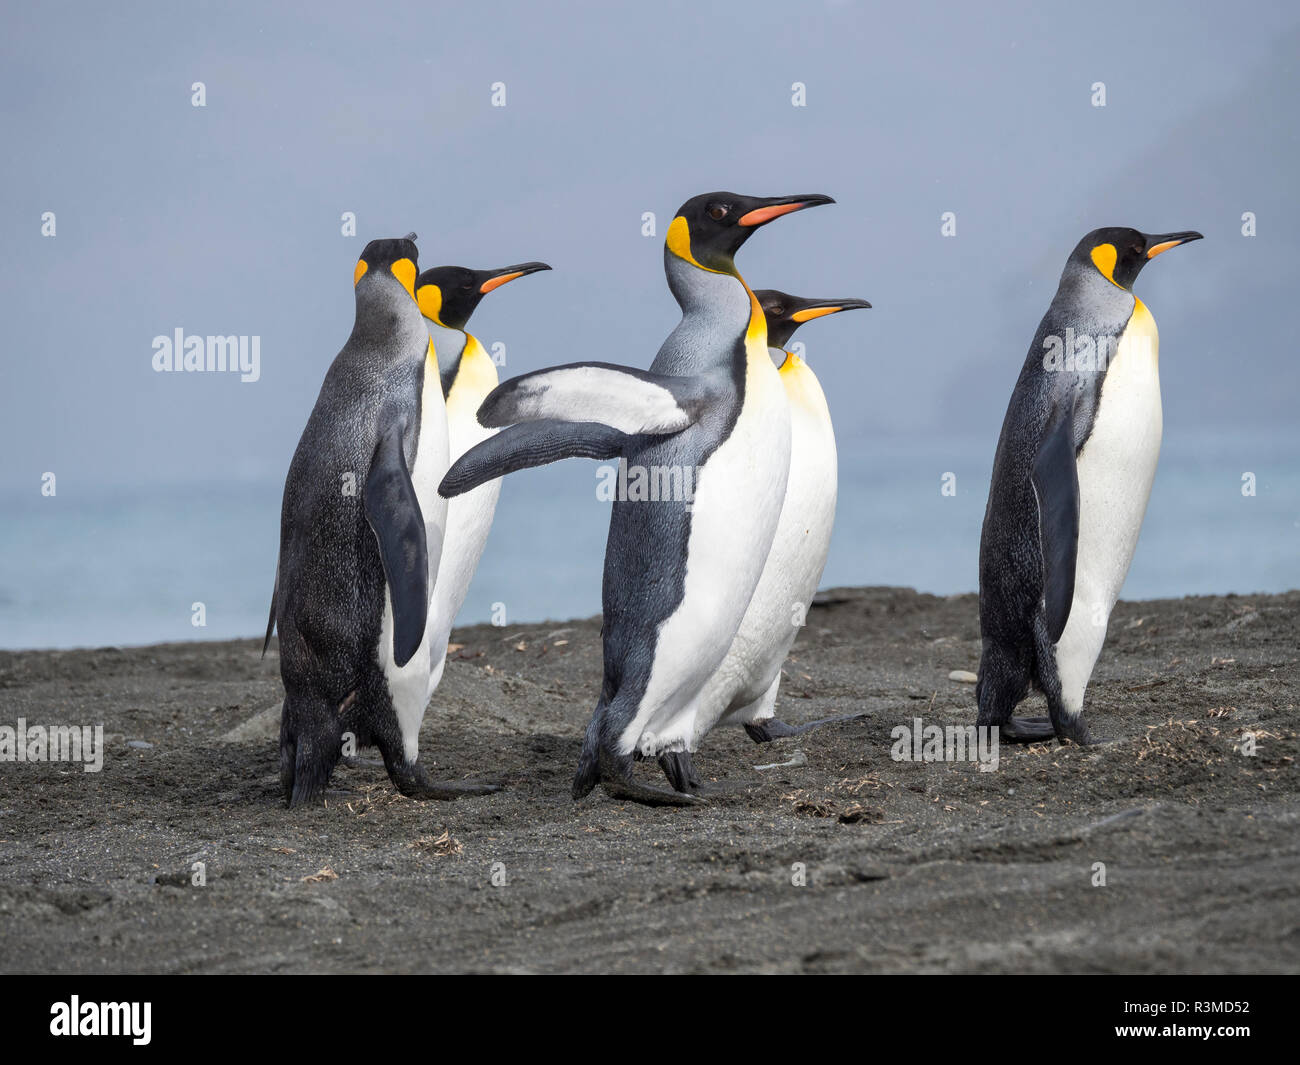 King Penguin (Aptenodytes patagonicus) rookery in St. Andrews Bay. Adults on beach approaching the colony. South Georgia Island Stock Photo